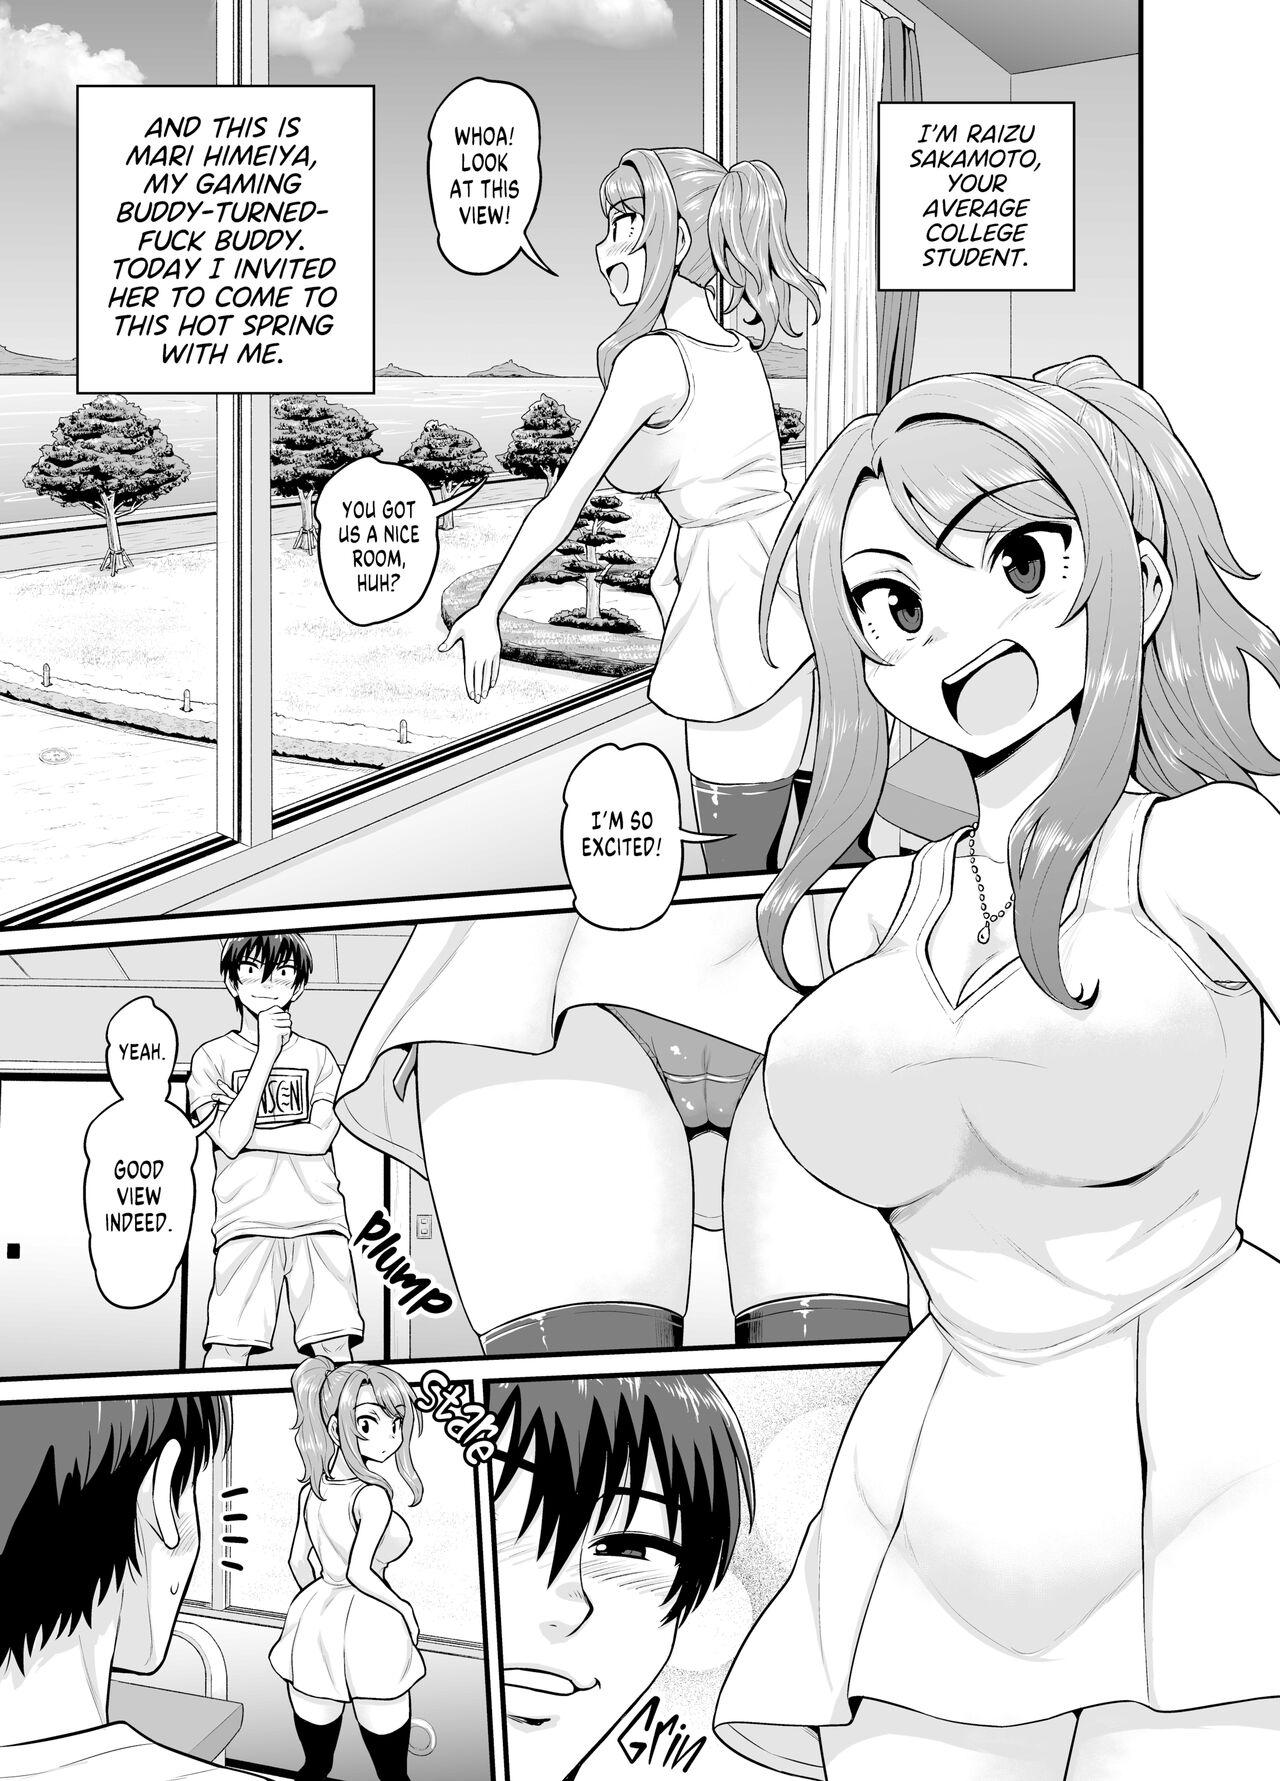 Chudai Getting it On With Your Gaming Buddy at the Hot Spring NTRVer. - Original Female Orgasm - Page 2